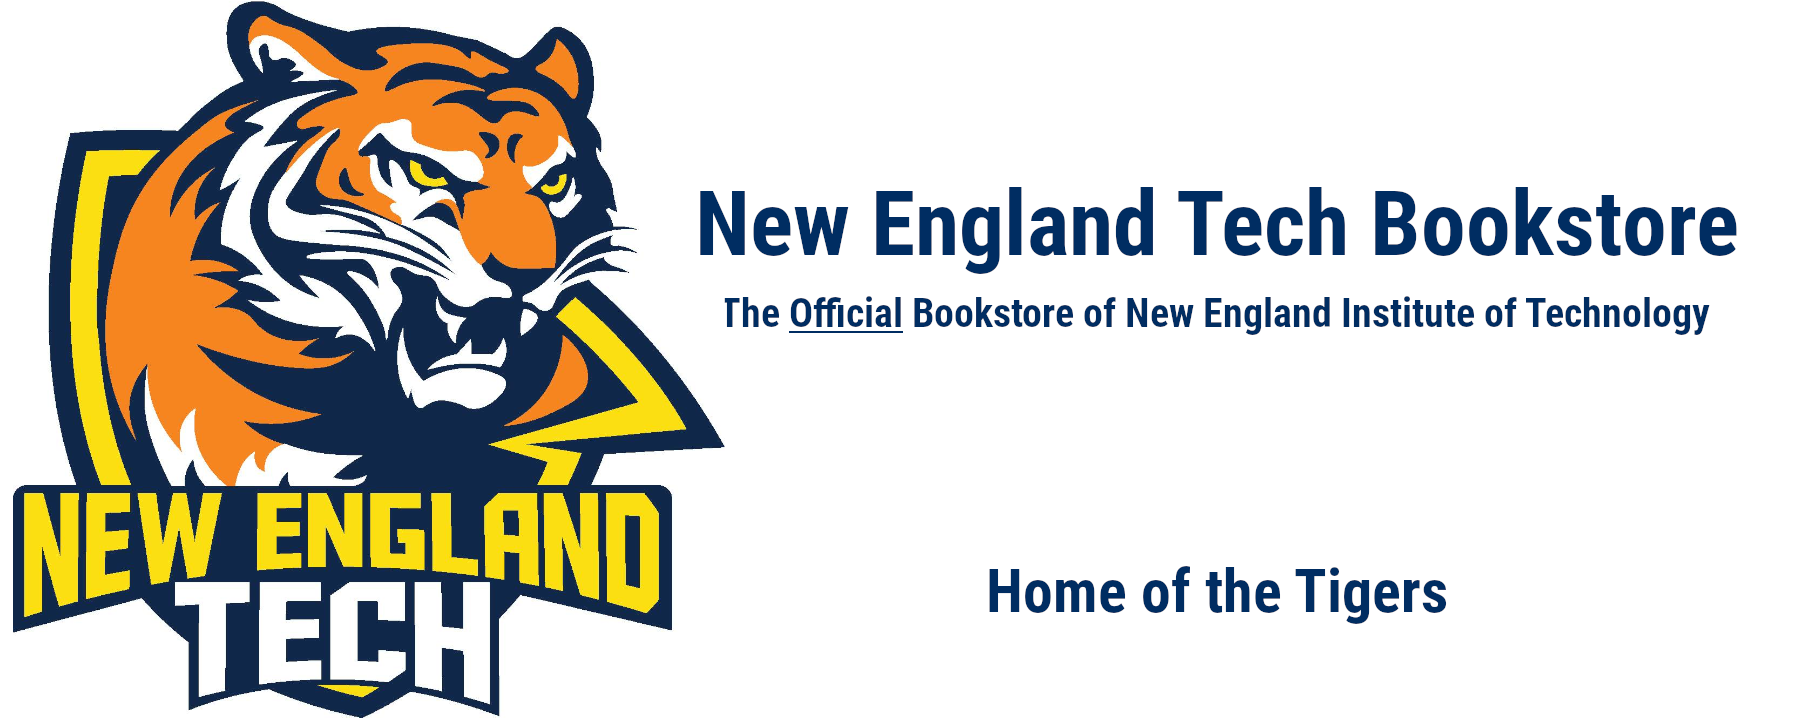 New England Tech Bookstore. The Official Bookstore of New England Institute of Technology